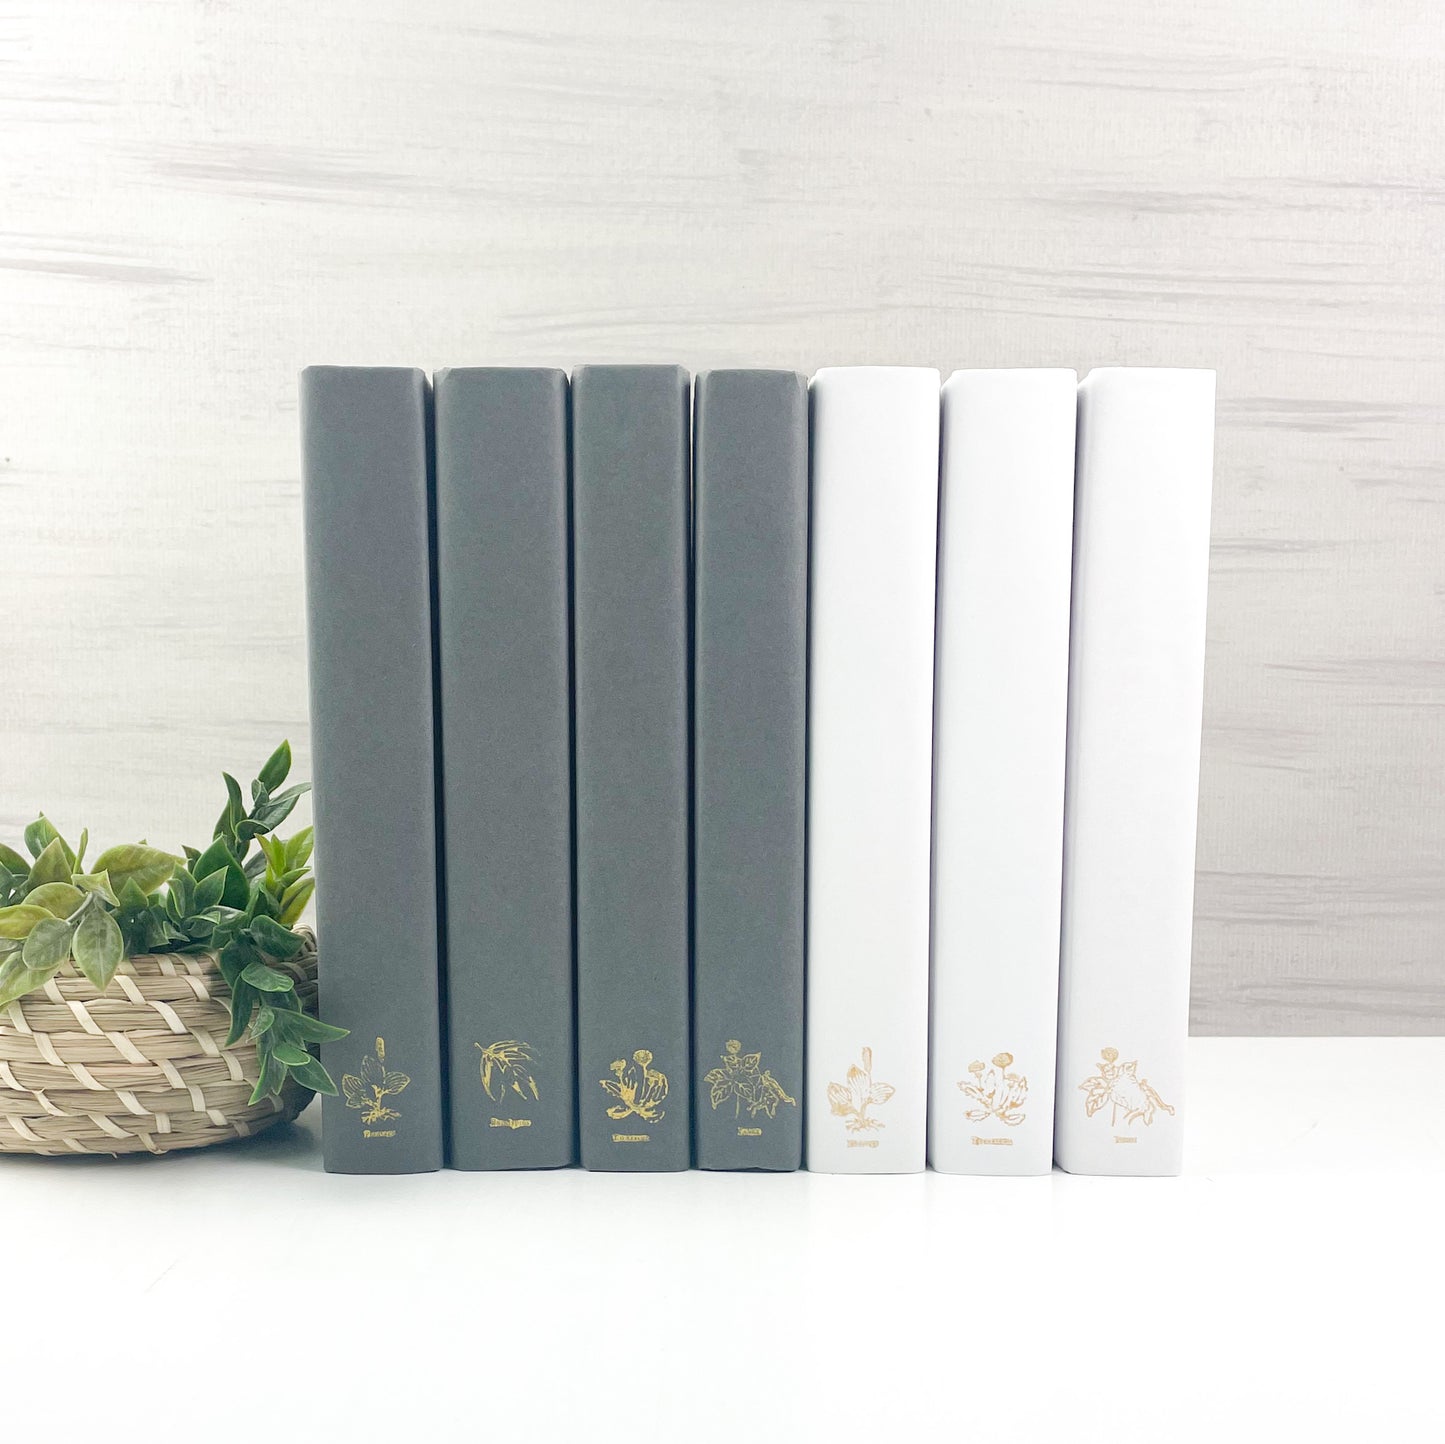 Stamped Decorative Books for Home Decor